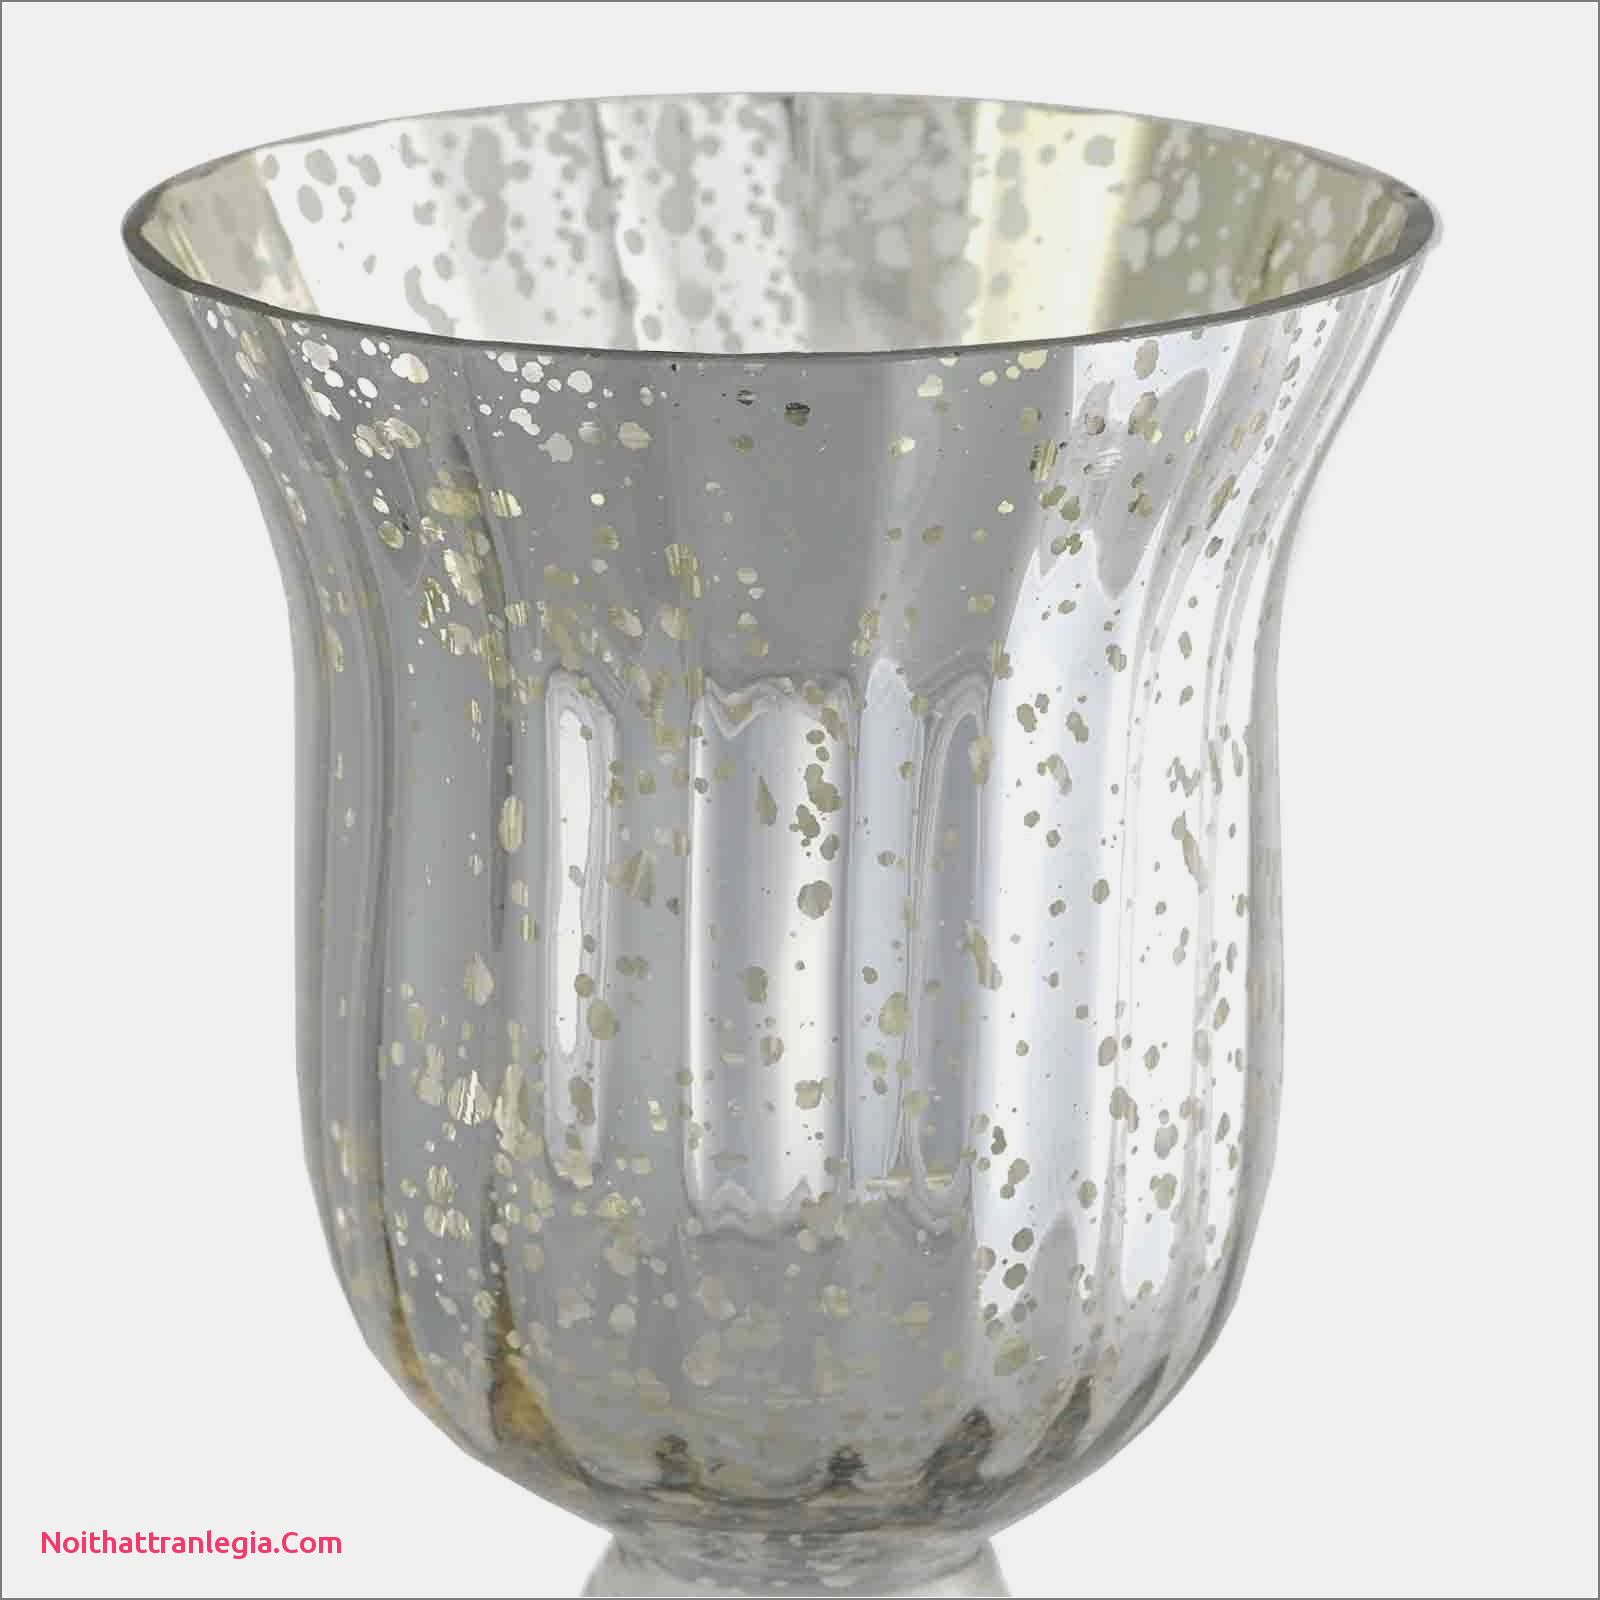 24 Unique Tall Vases for Sale 2023 free download tall vases for sale of 20 wedding vases noithattranlegia vases design intended for wedding guest gift ideas inspirational candles for wedding favors superb pe s5h vases candle vase i